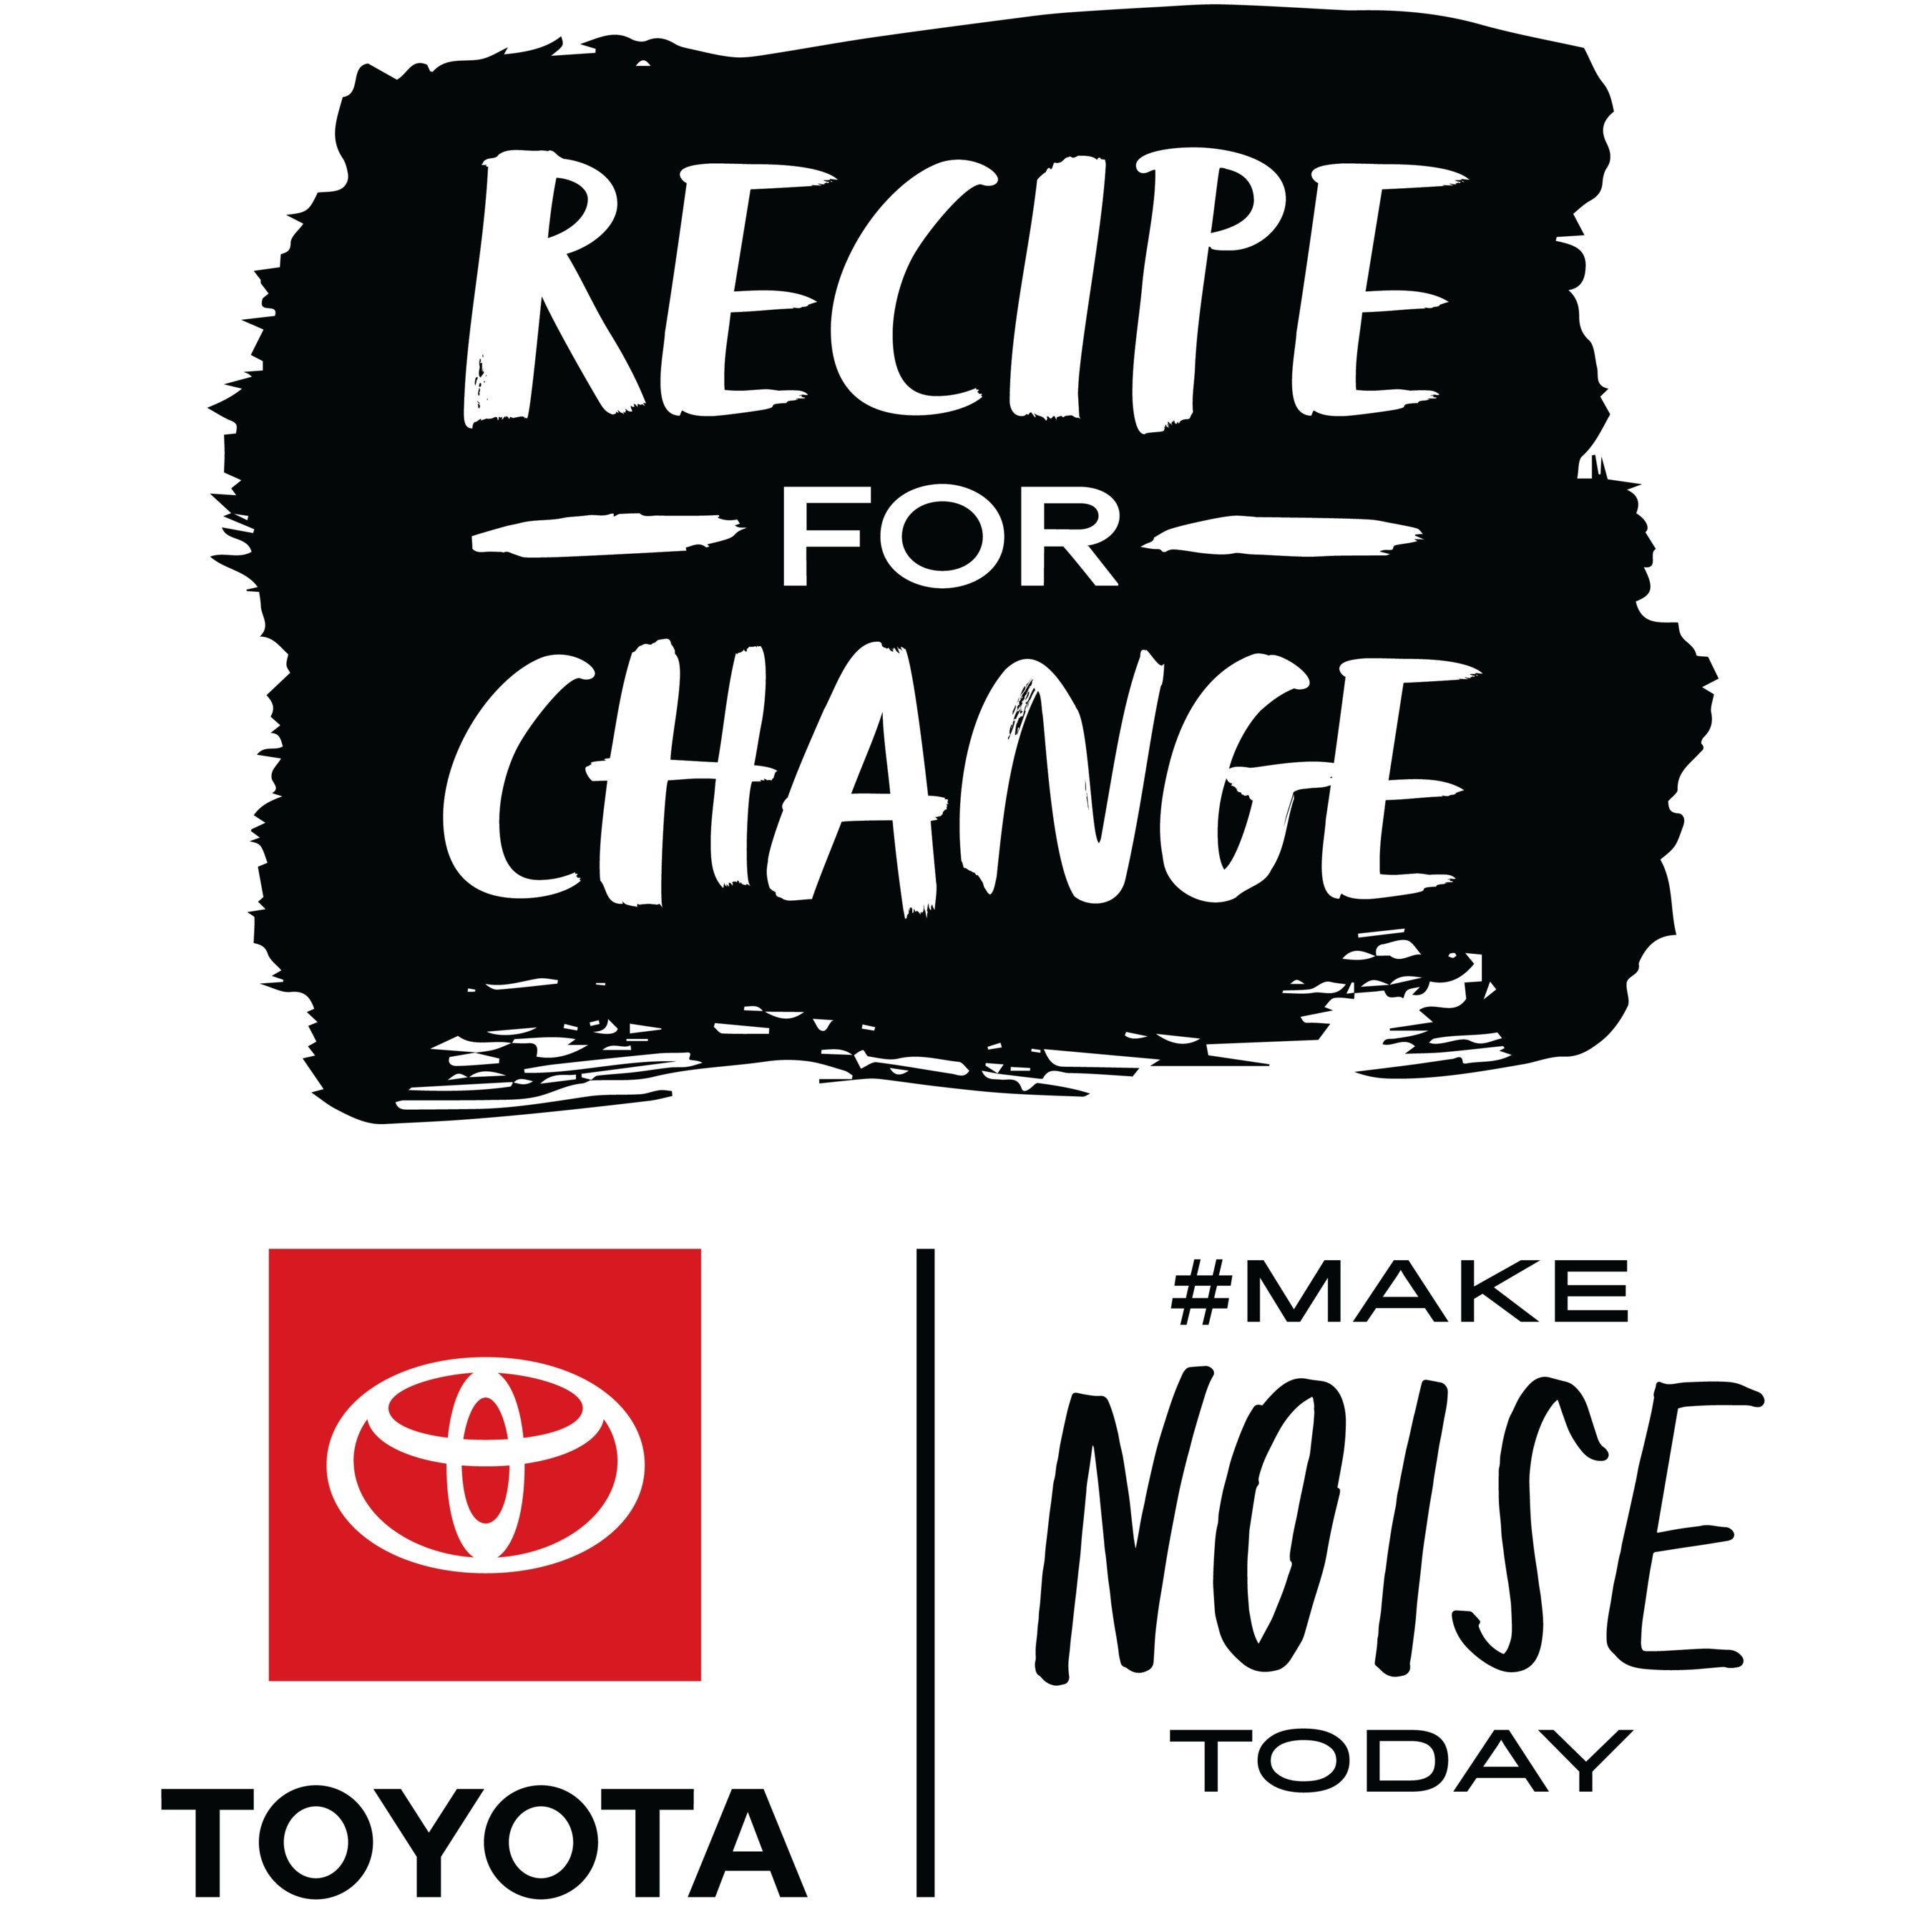 Make Noise Today: Recipe for Change campaign collaboration between Toyota and Intertrend.